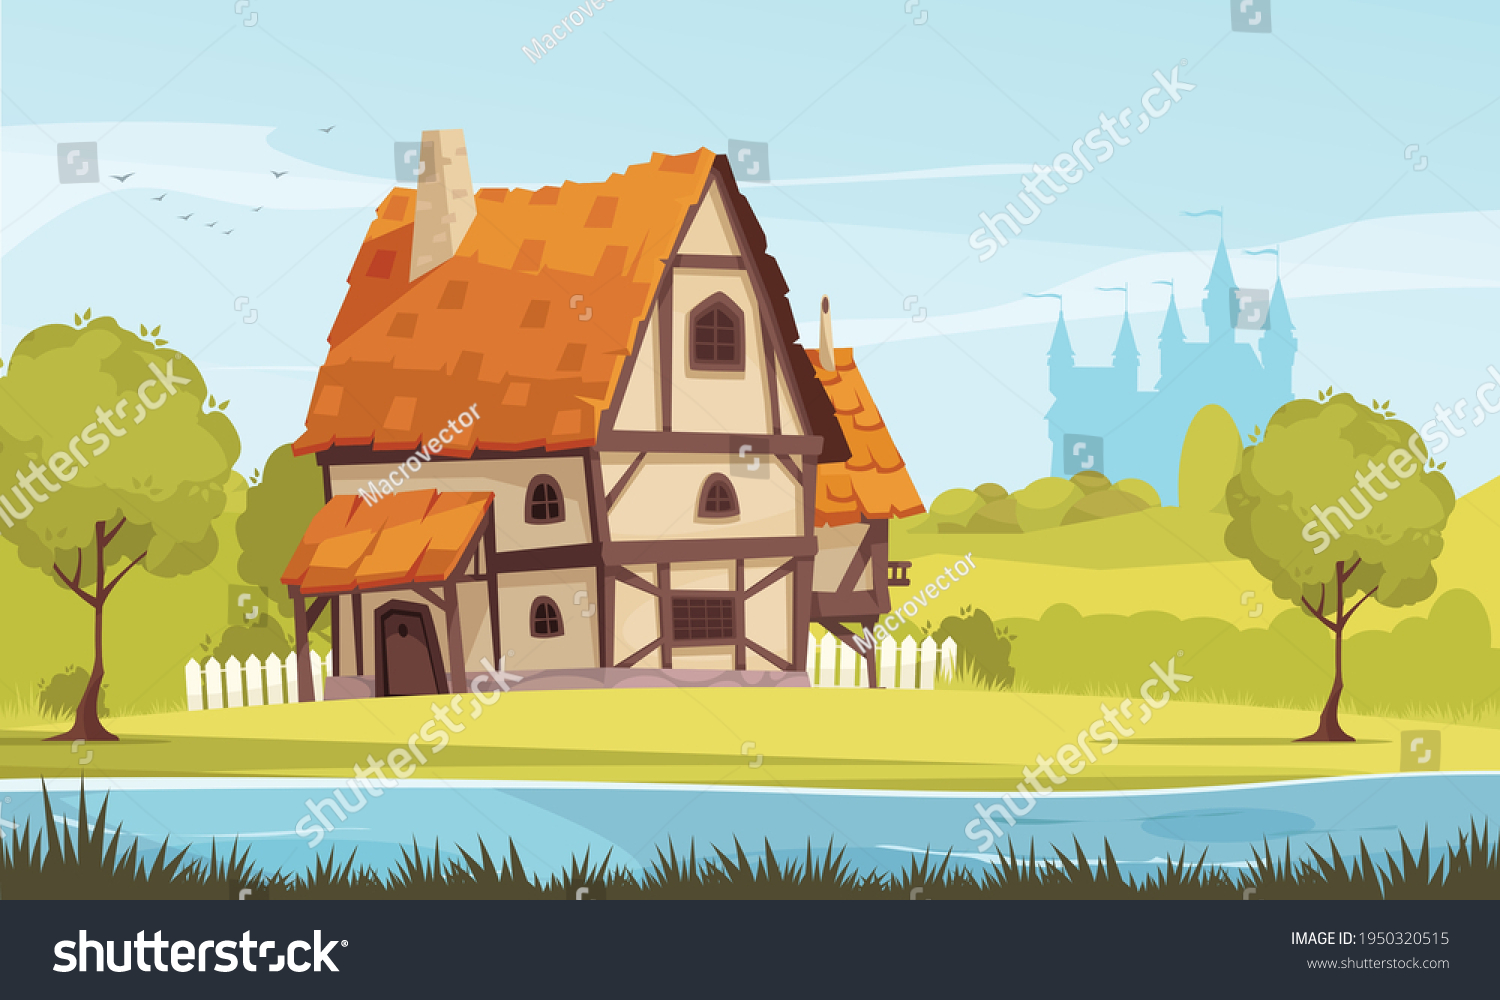 SVG of Architectural evolution cartoon image of medieval suburban cottage surrounded by nature with castle silhouette on background vector illustration svg